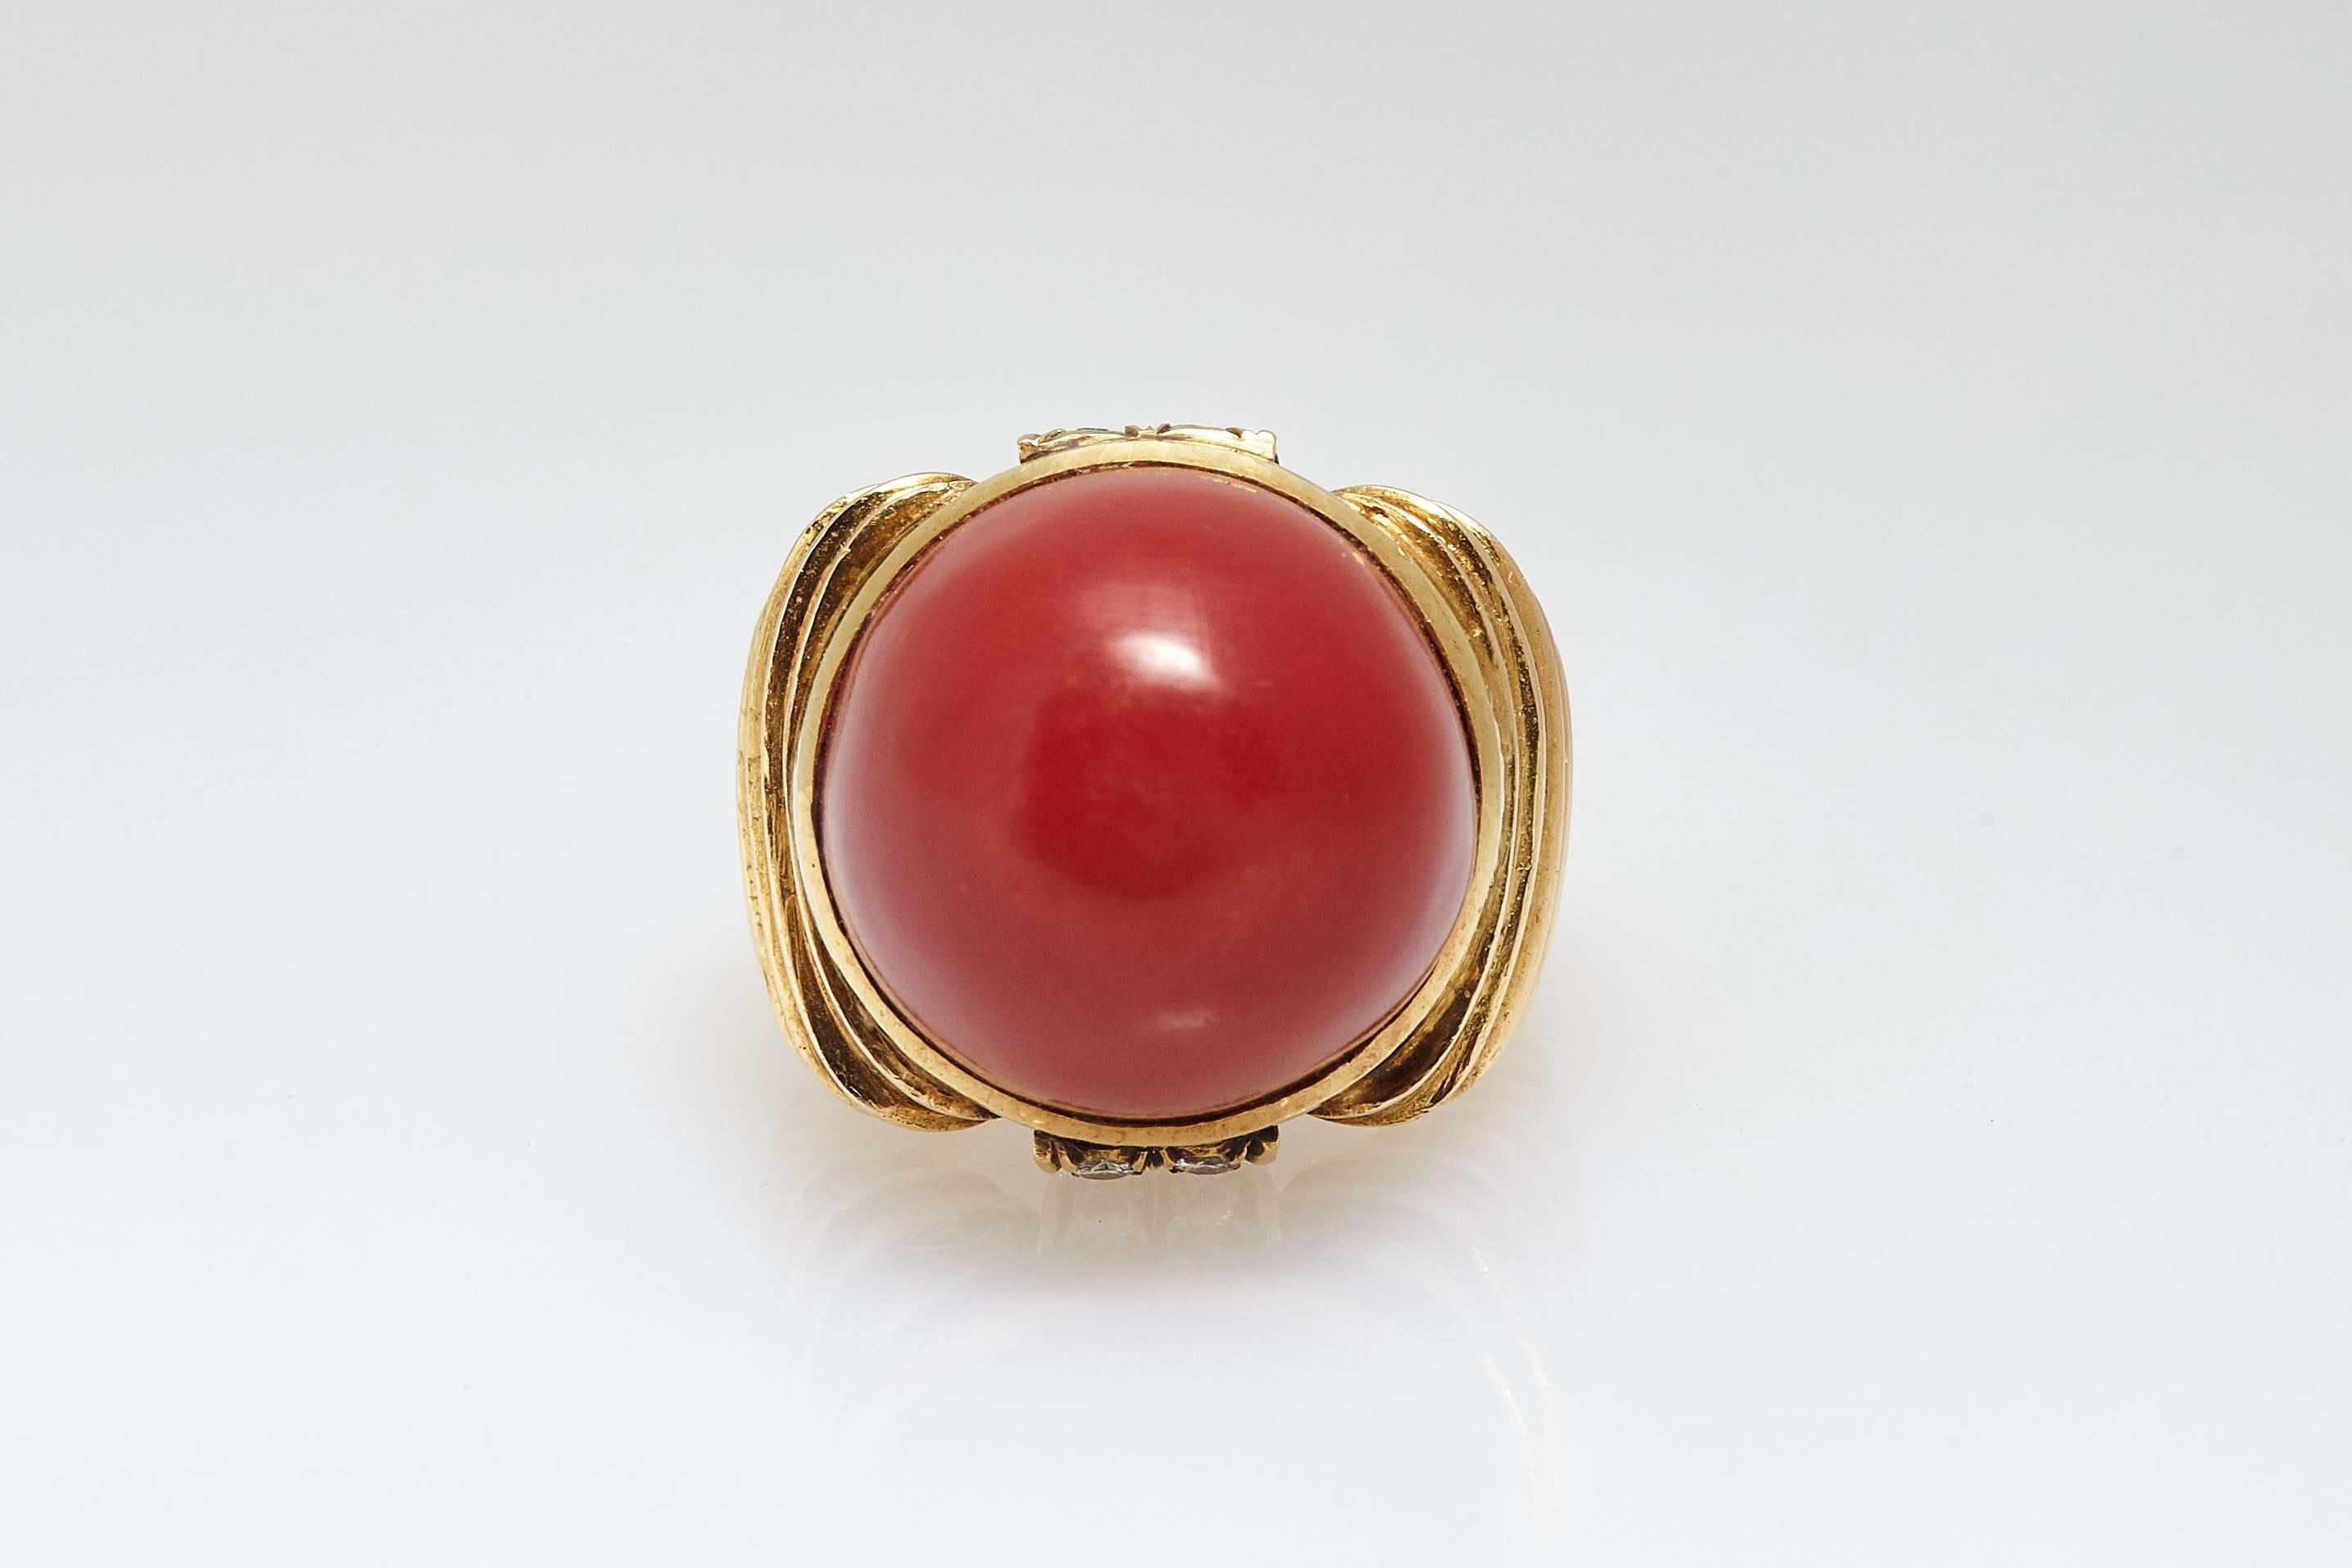 An impressive 18kt yellow gold cocktail ring showcasing a fine red coral dome shaped element, accented by small diamonds on the side. Made in Italy, circa 1970.